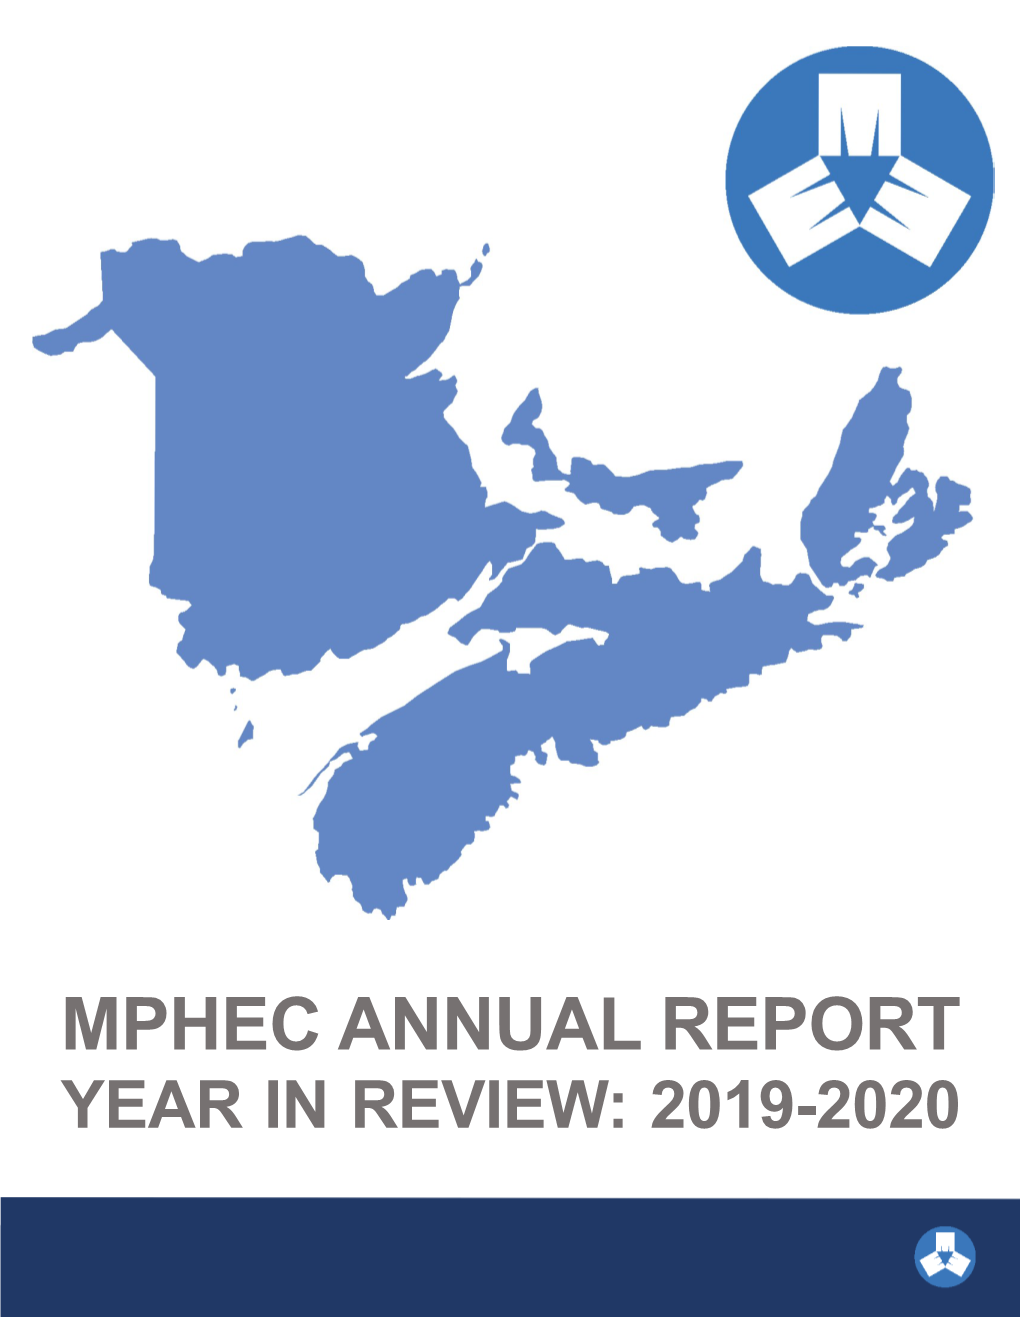 Mphec Annual Report Year in Review: 2019-2020